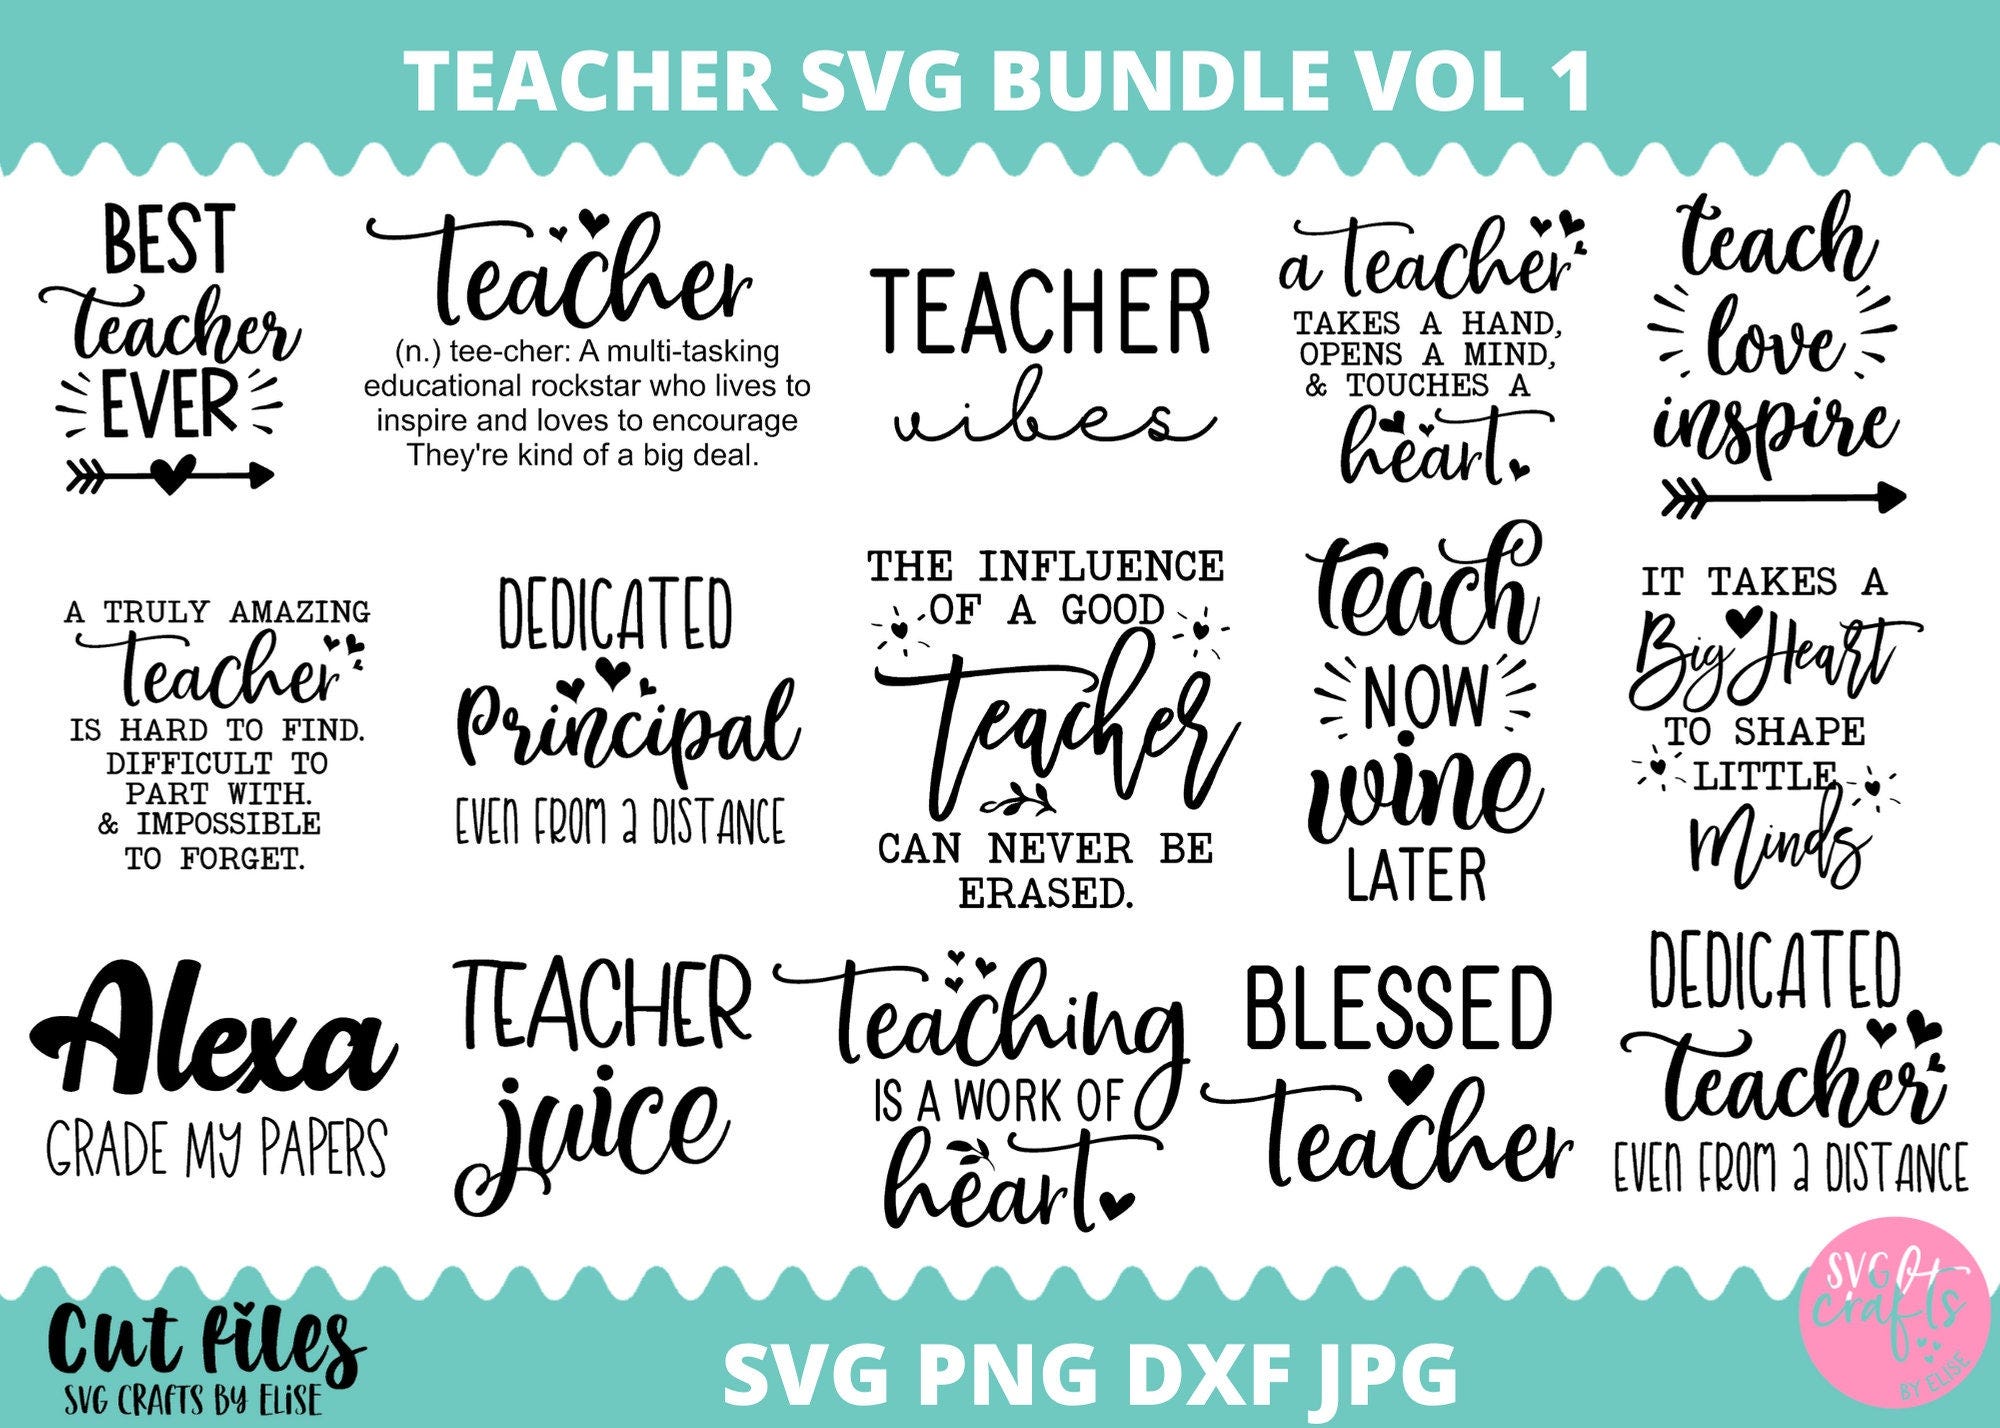 Teacher Bundle, Teacher SVG Bundle, Teacher SVG, Teacher life svg, dxf, png instant download, Teacher Quote SVG, Teach Love Inspire svg